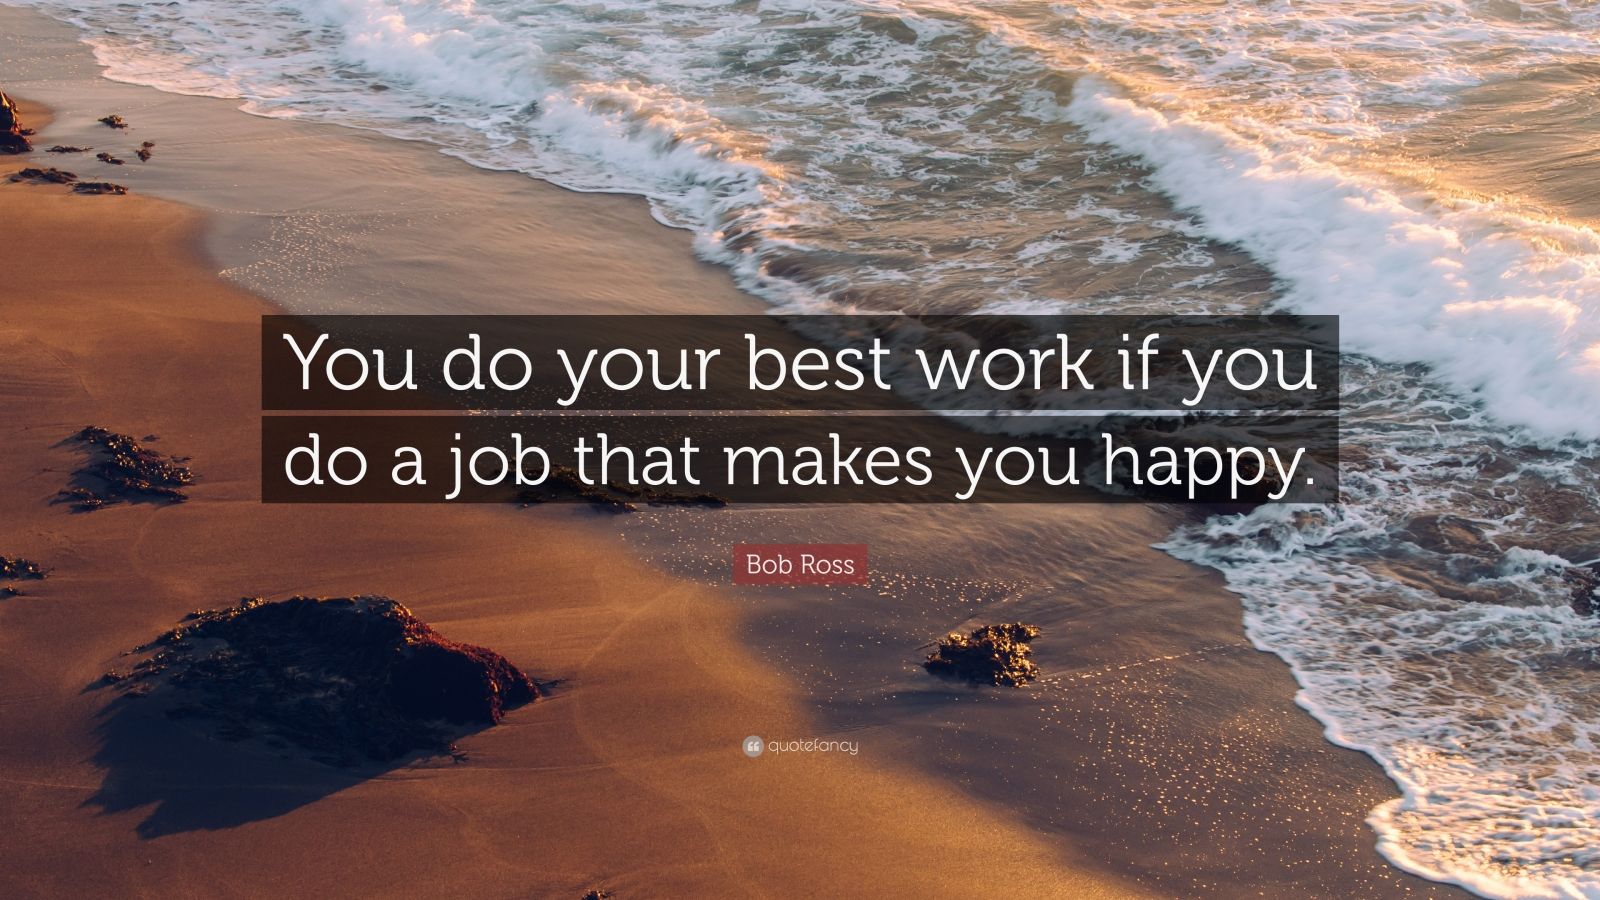 Bob Ross Quote: “You do your best work if you do a job that makes you